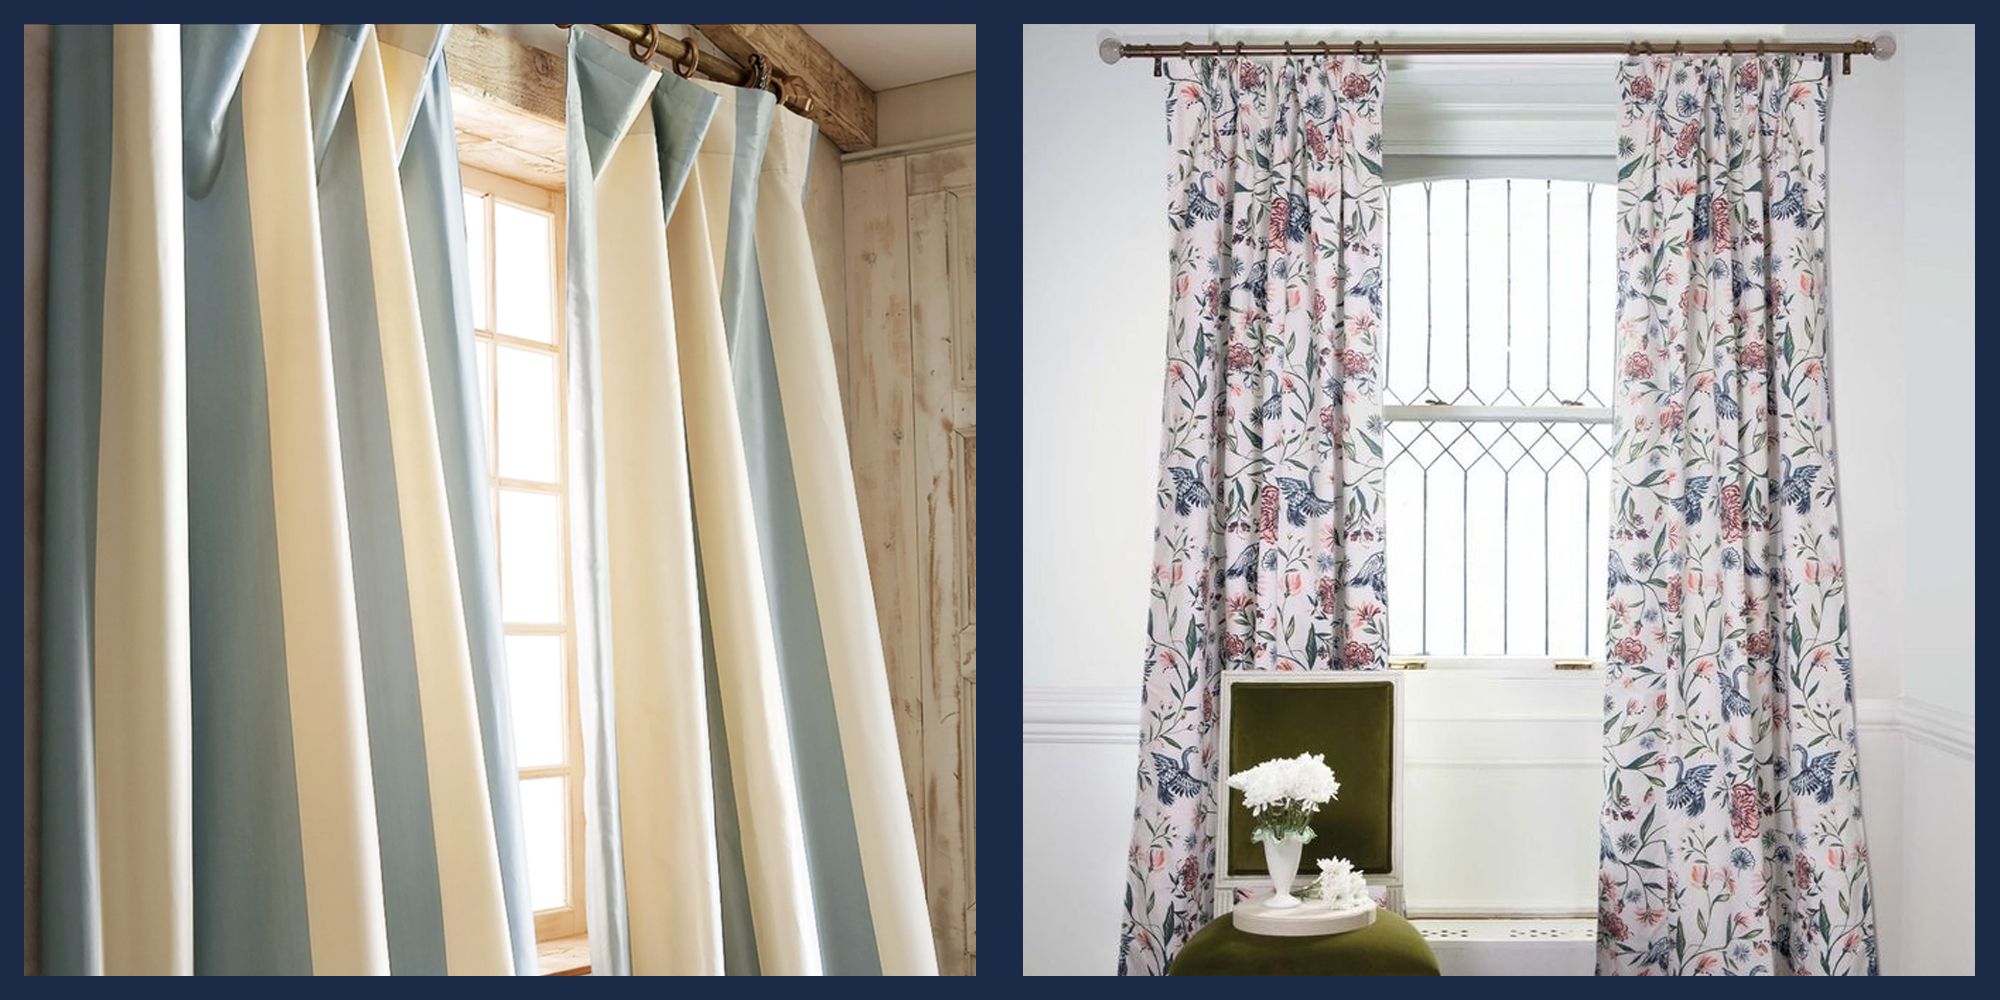 Which company is best for curtains?